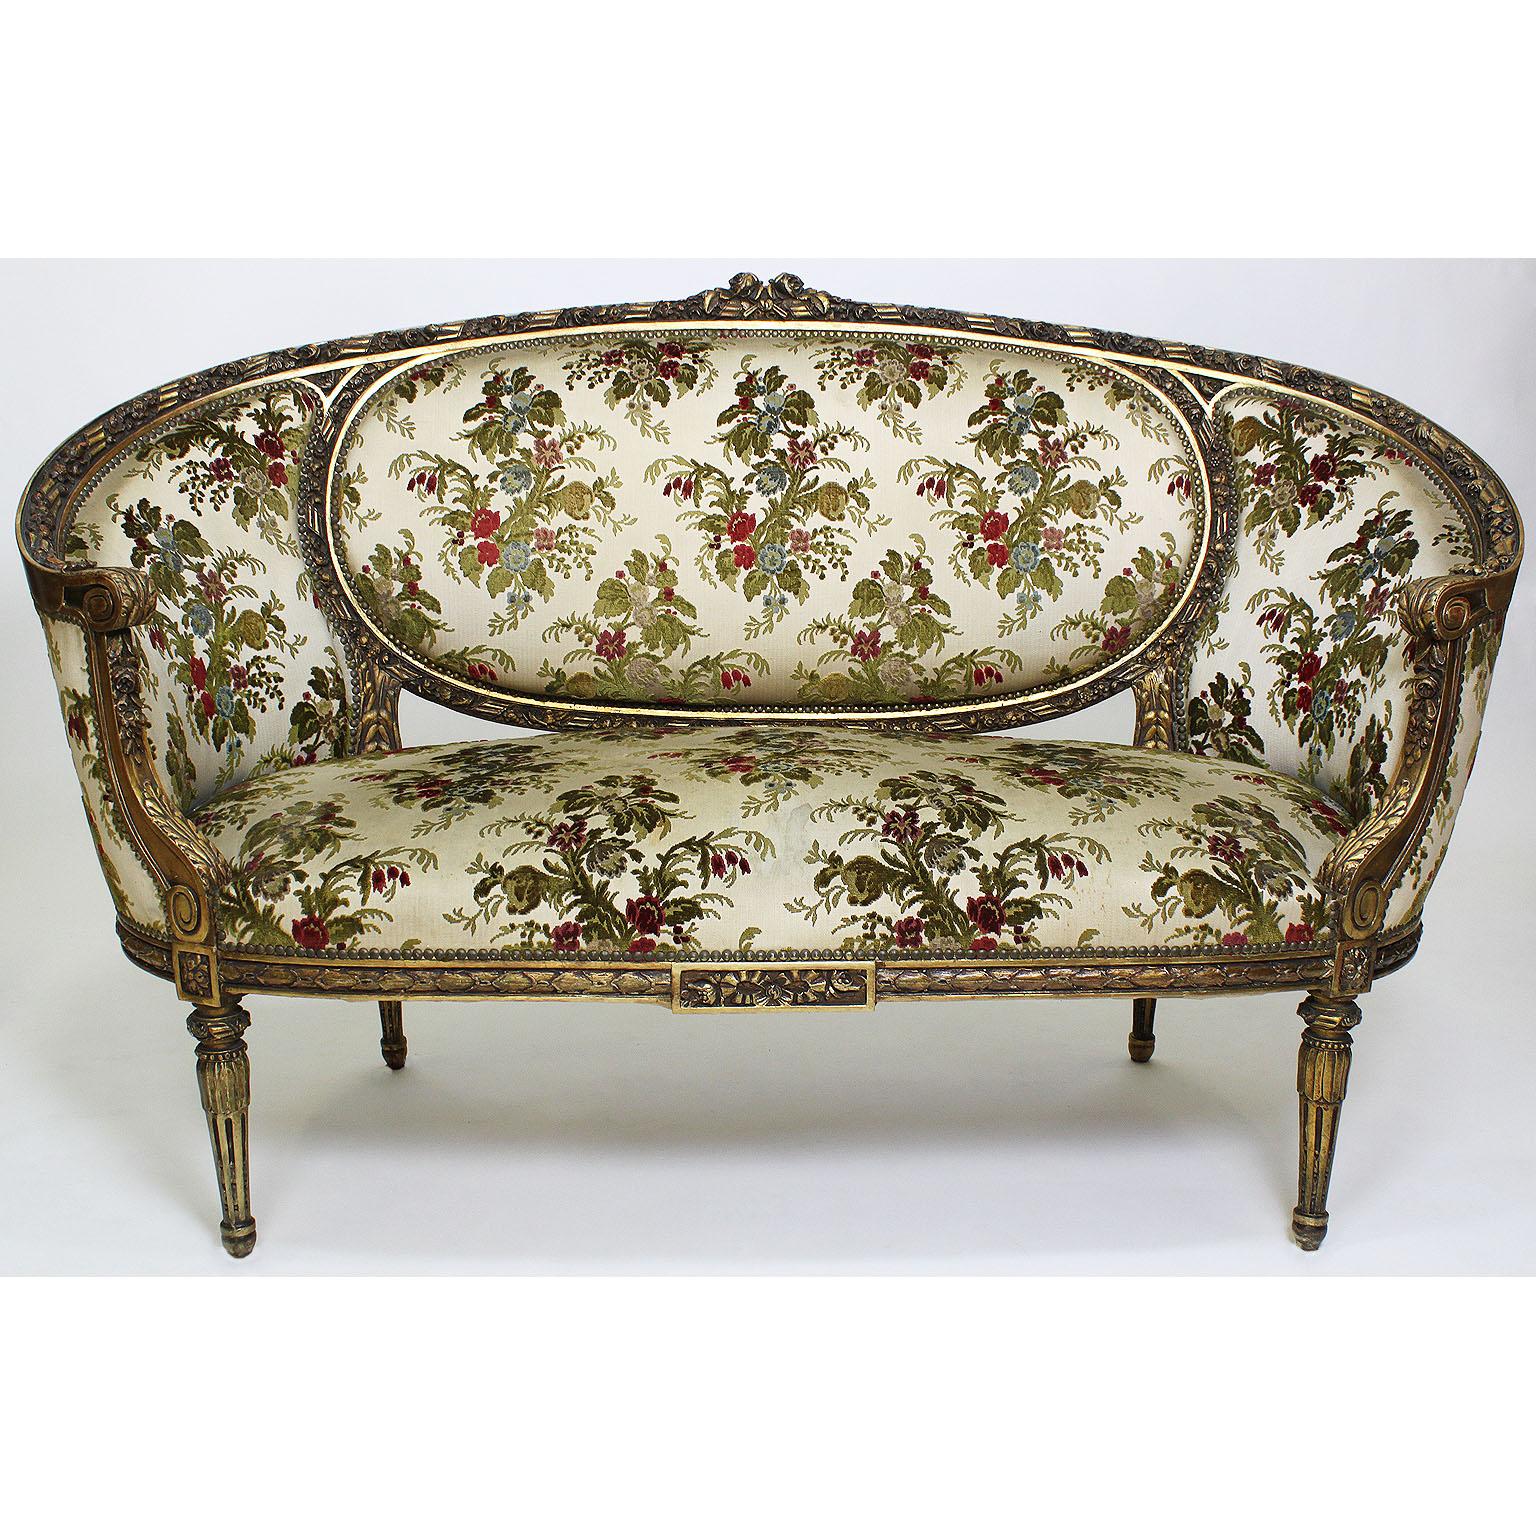 A French 19th-20th century Louis XVI style giltwood carved three-piece salon suite frames. The ornately carved set comprising of a settee and a pair of fauteuils a la Reine (armchairs). The settee with floral carvings and rounded bergère style